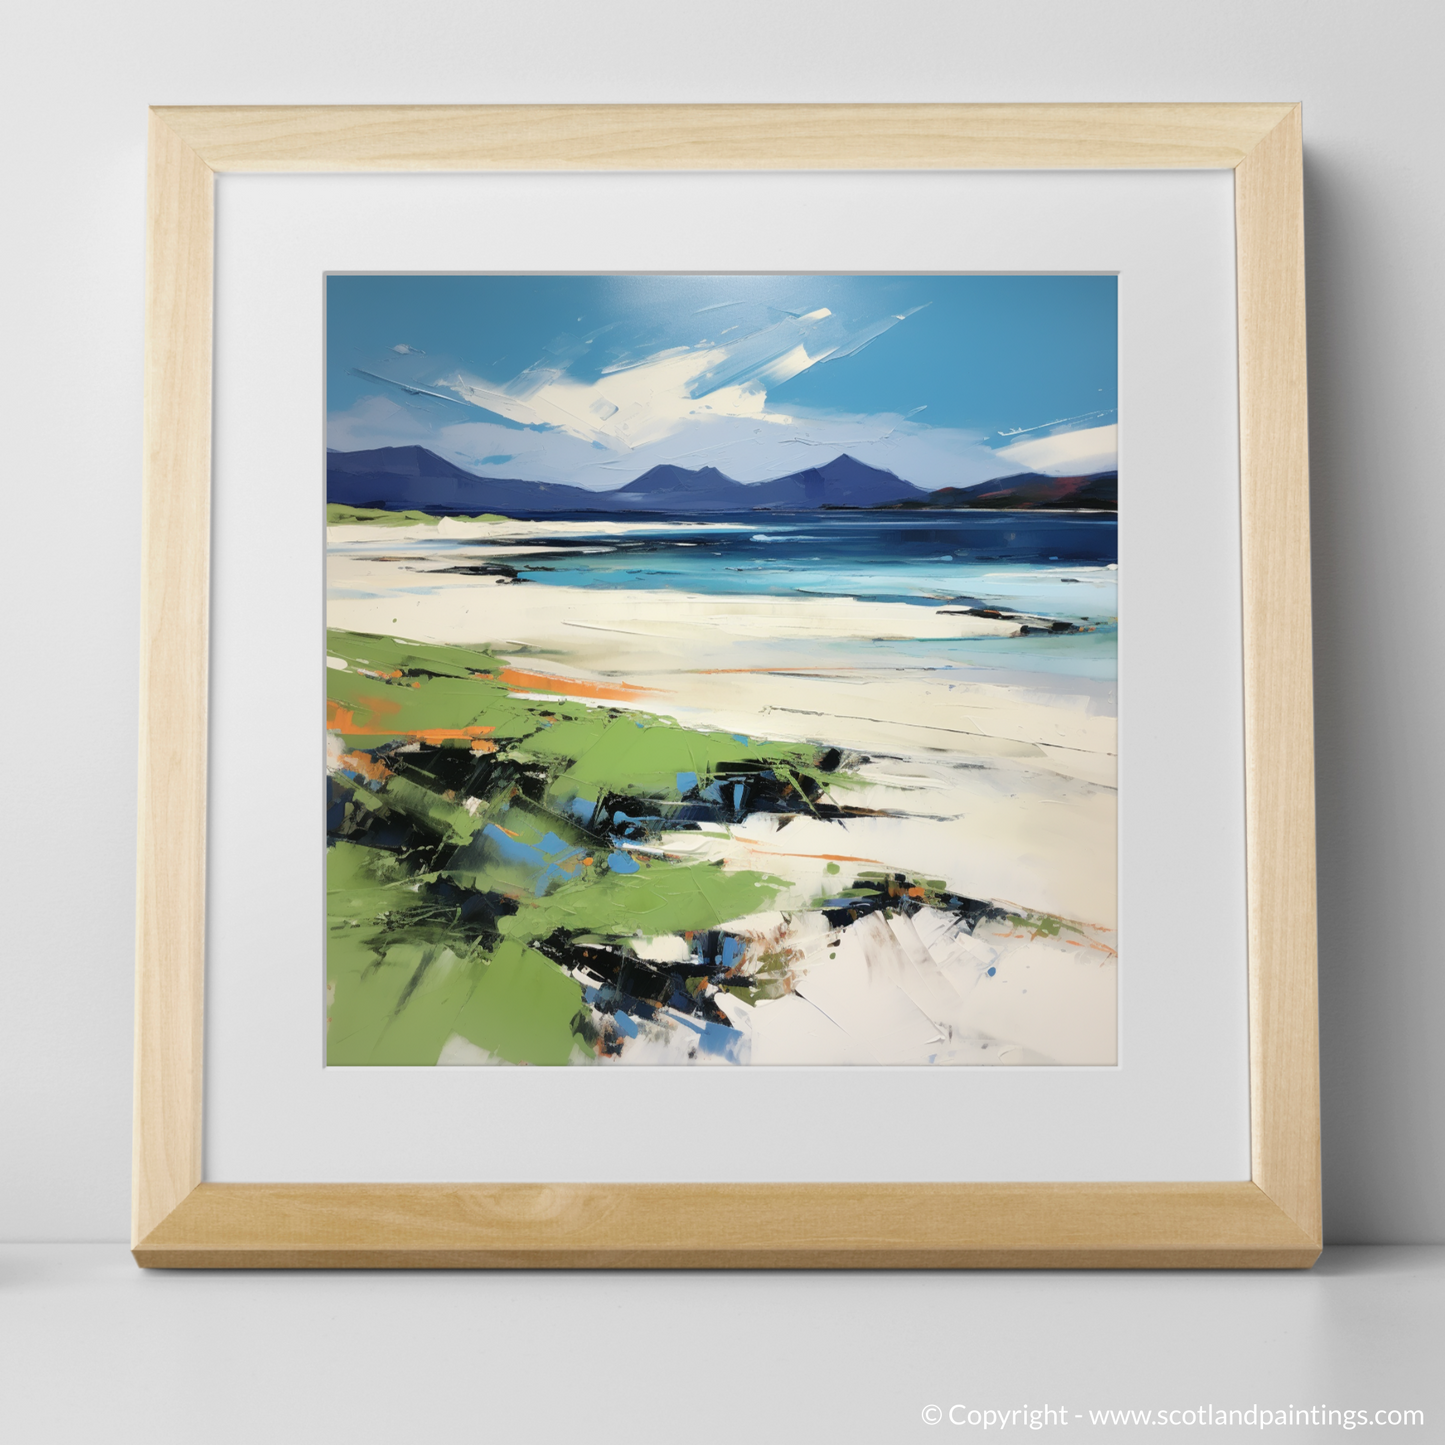 Art Print of Mellon Udrigle Beach, Wester Ross in summer with a natural frame